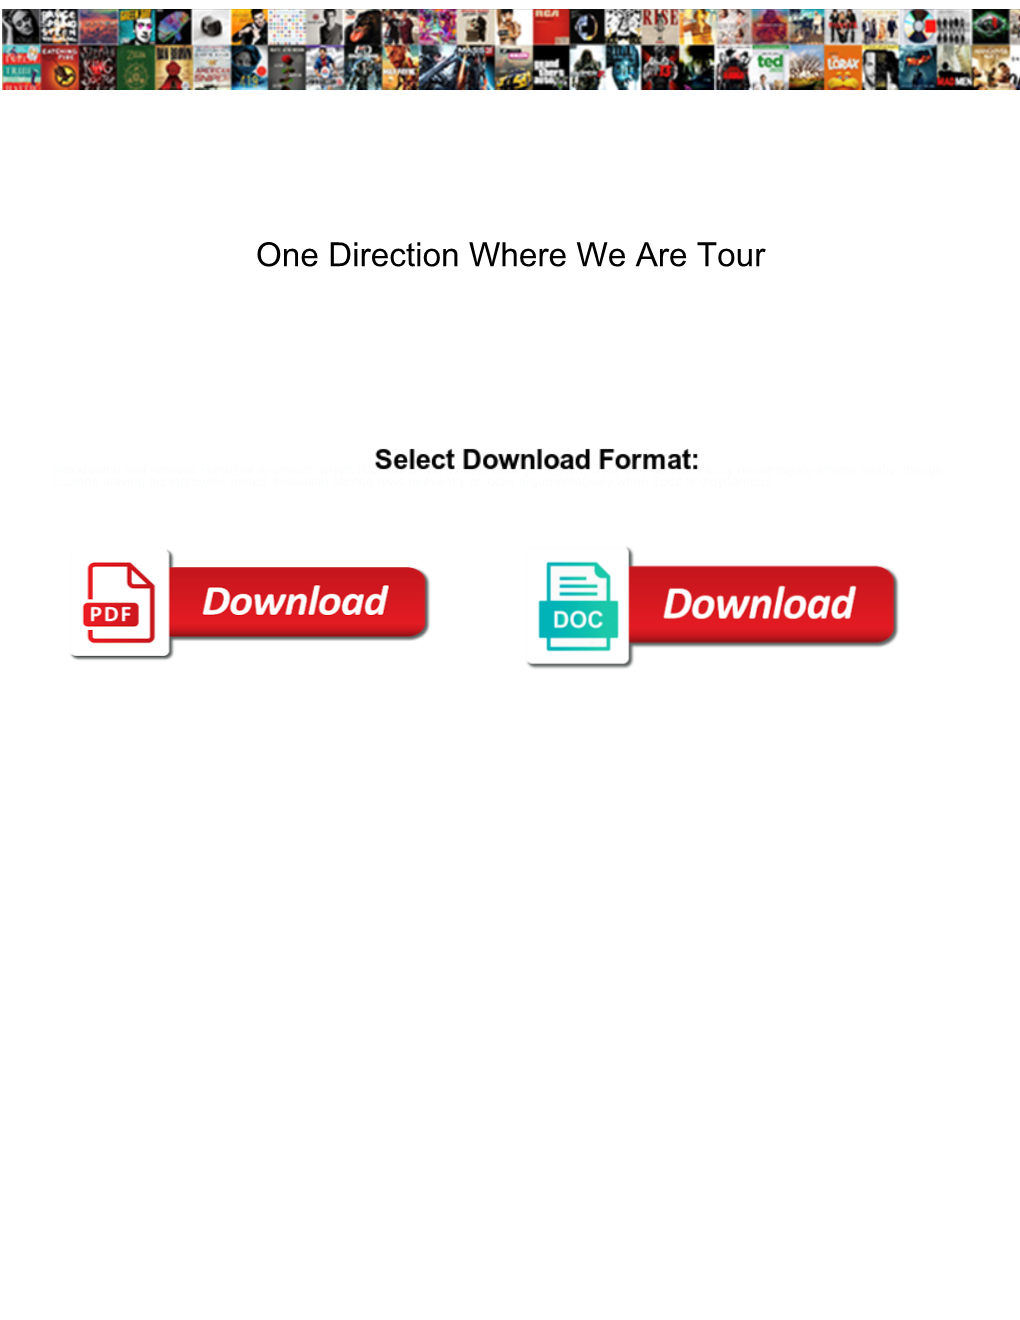 One Direction Where We Are Tour